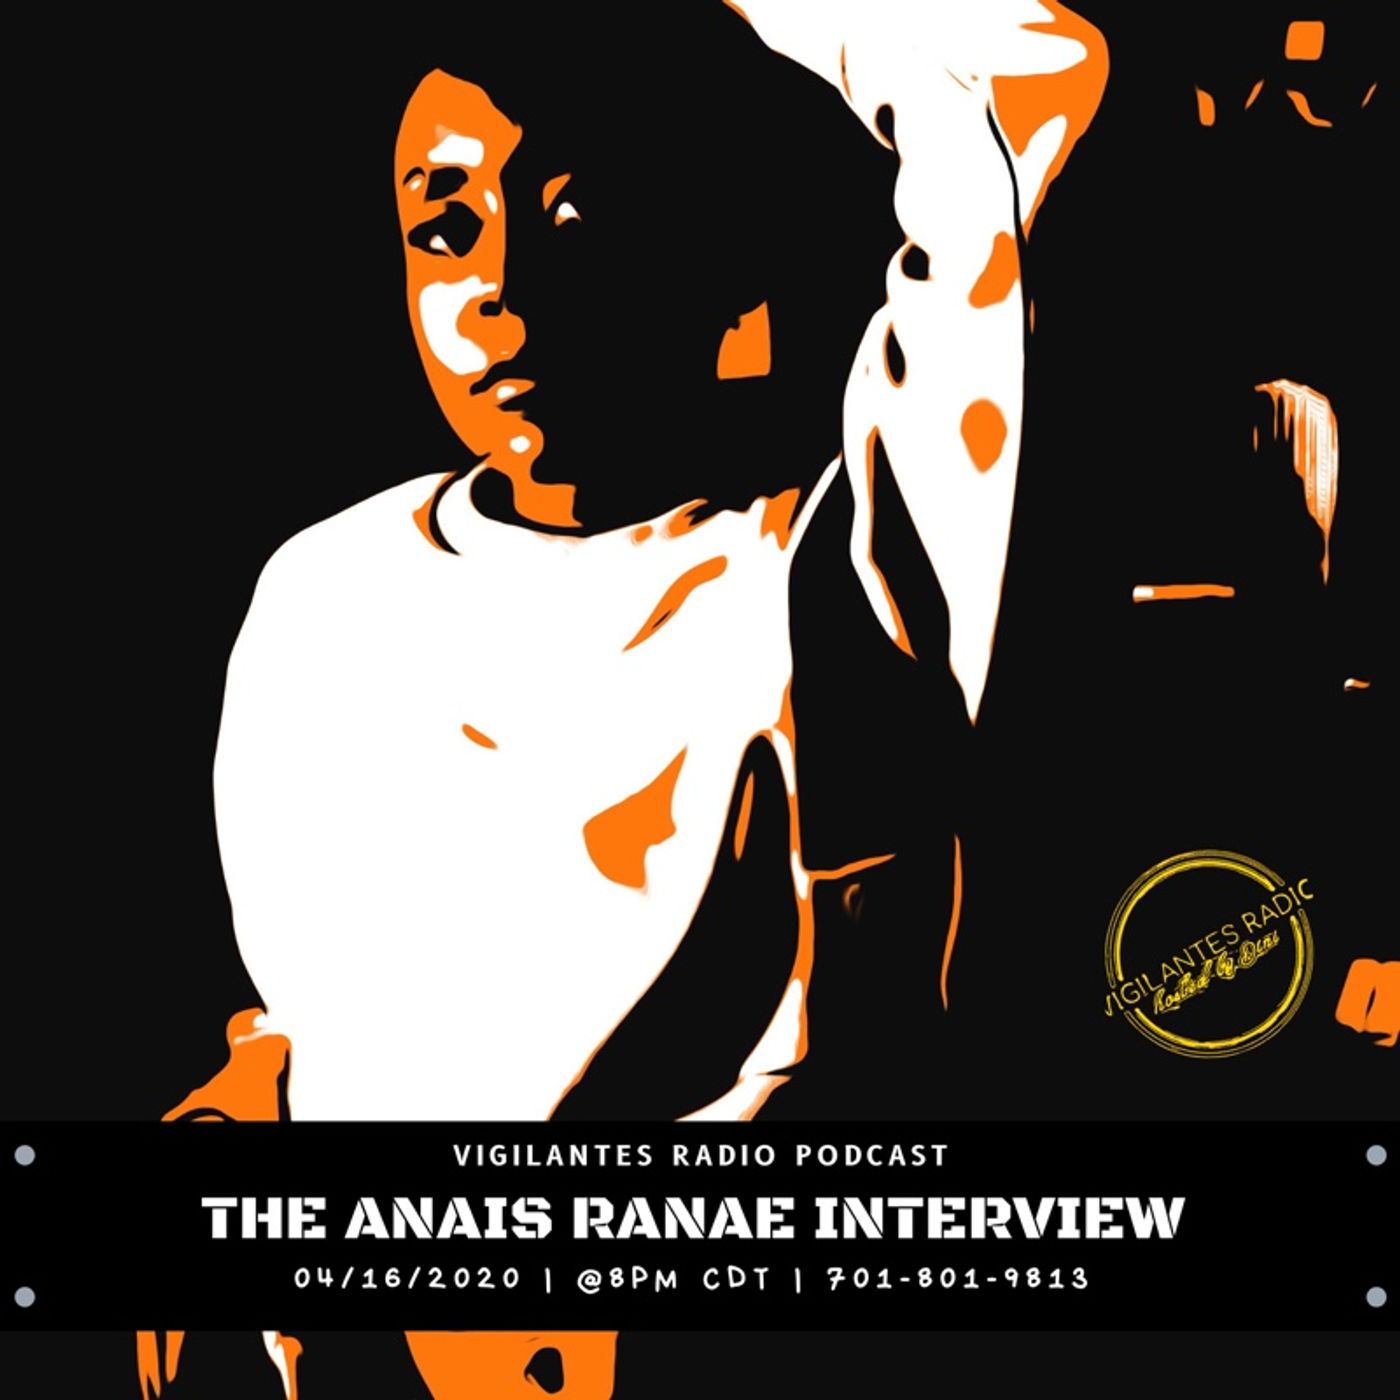 The Anais Ranae Interview. Image